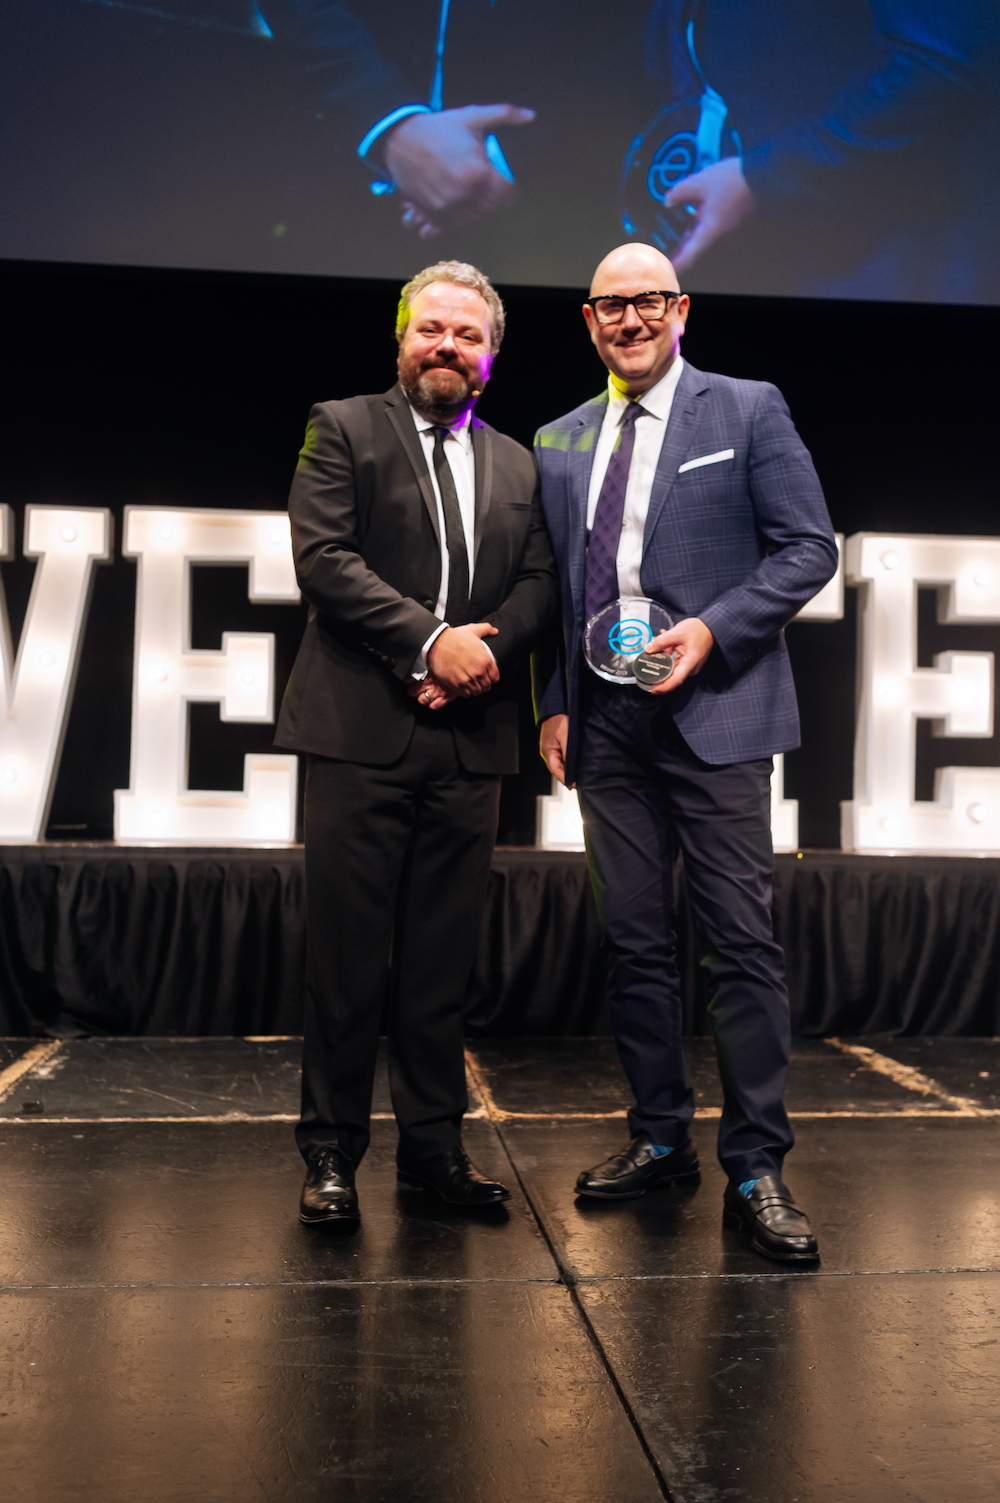 CEO Todd Heintz receiving the Event Tech Awards 2019 for Attendease 